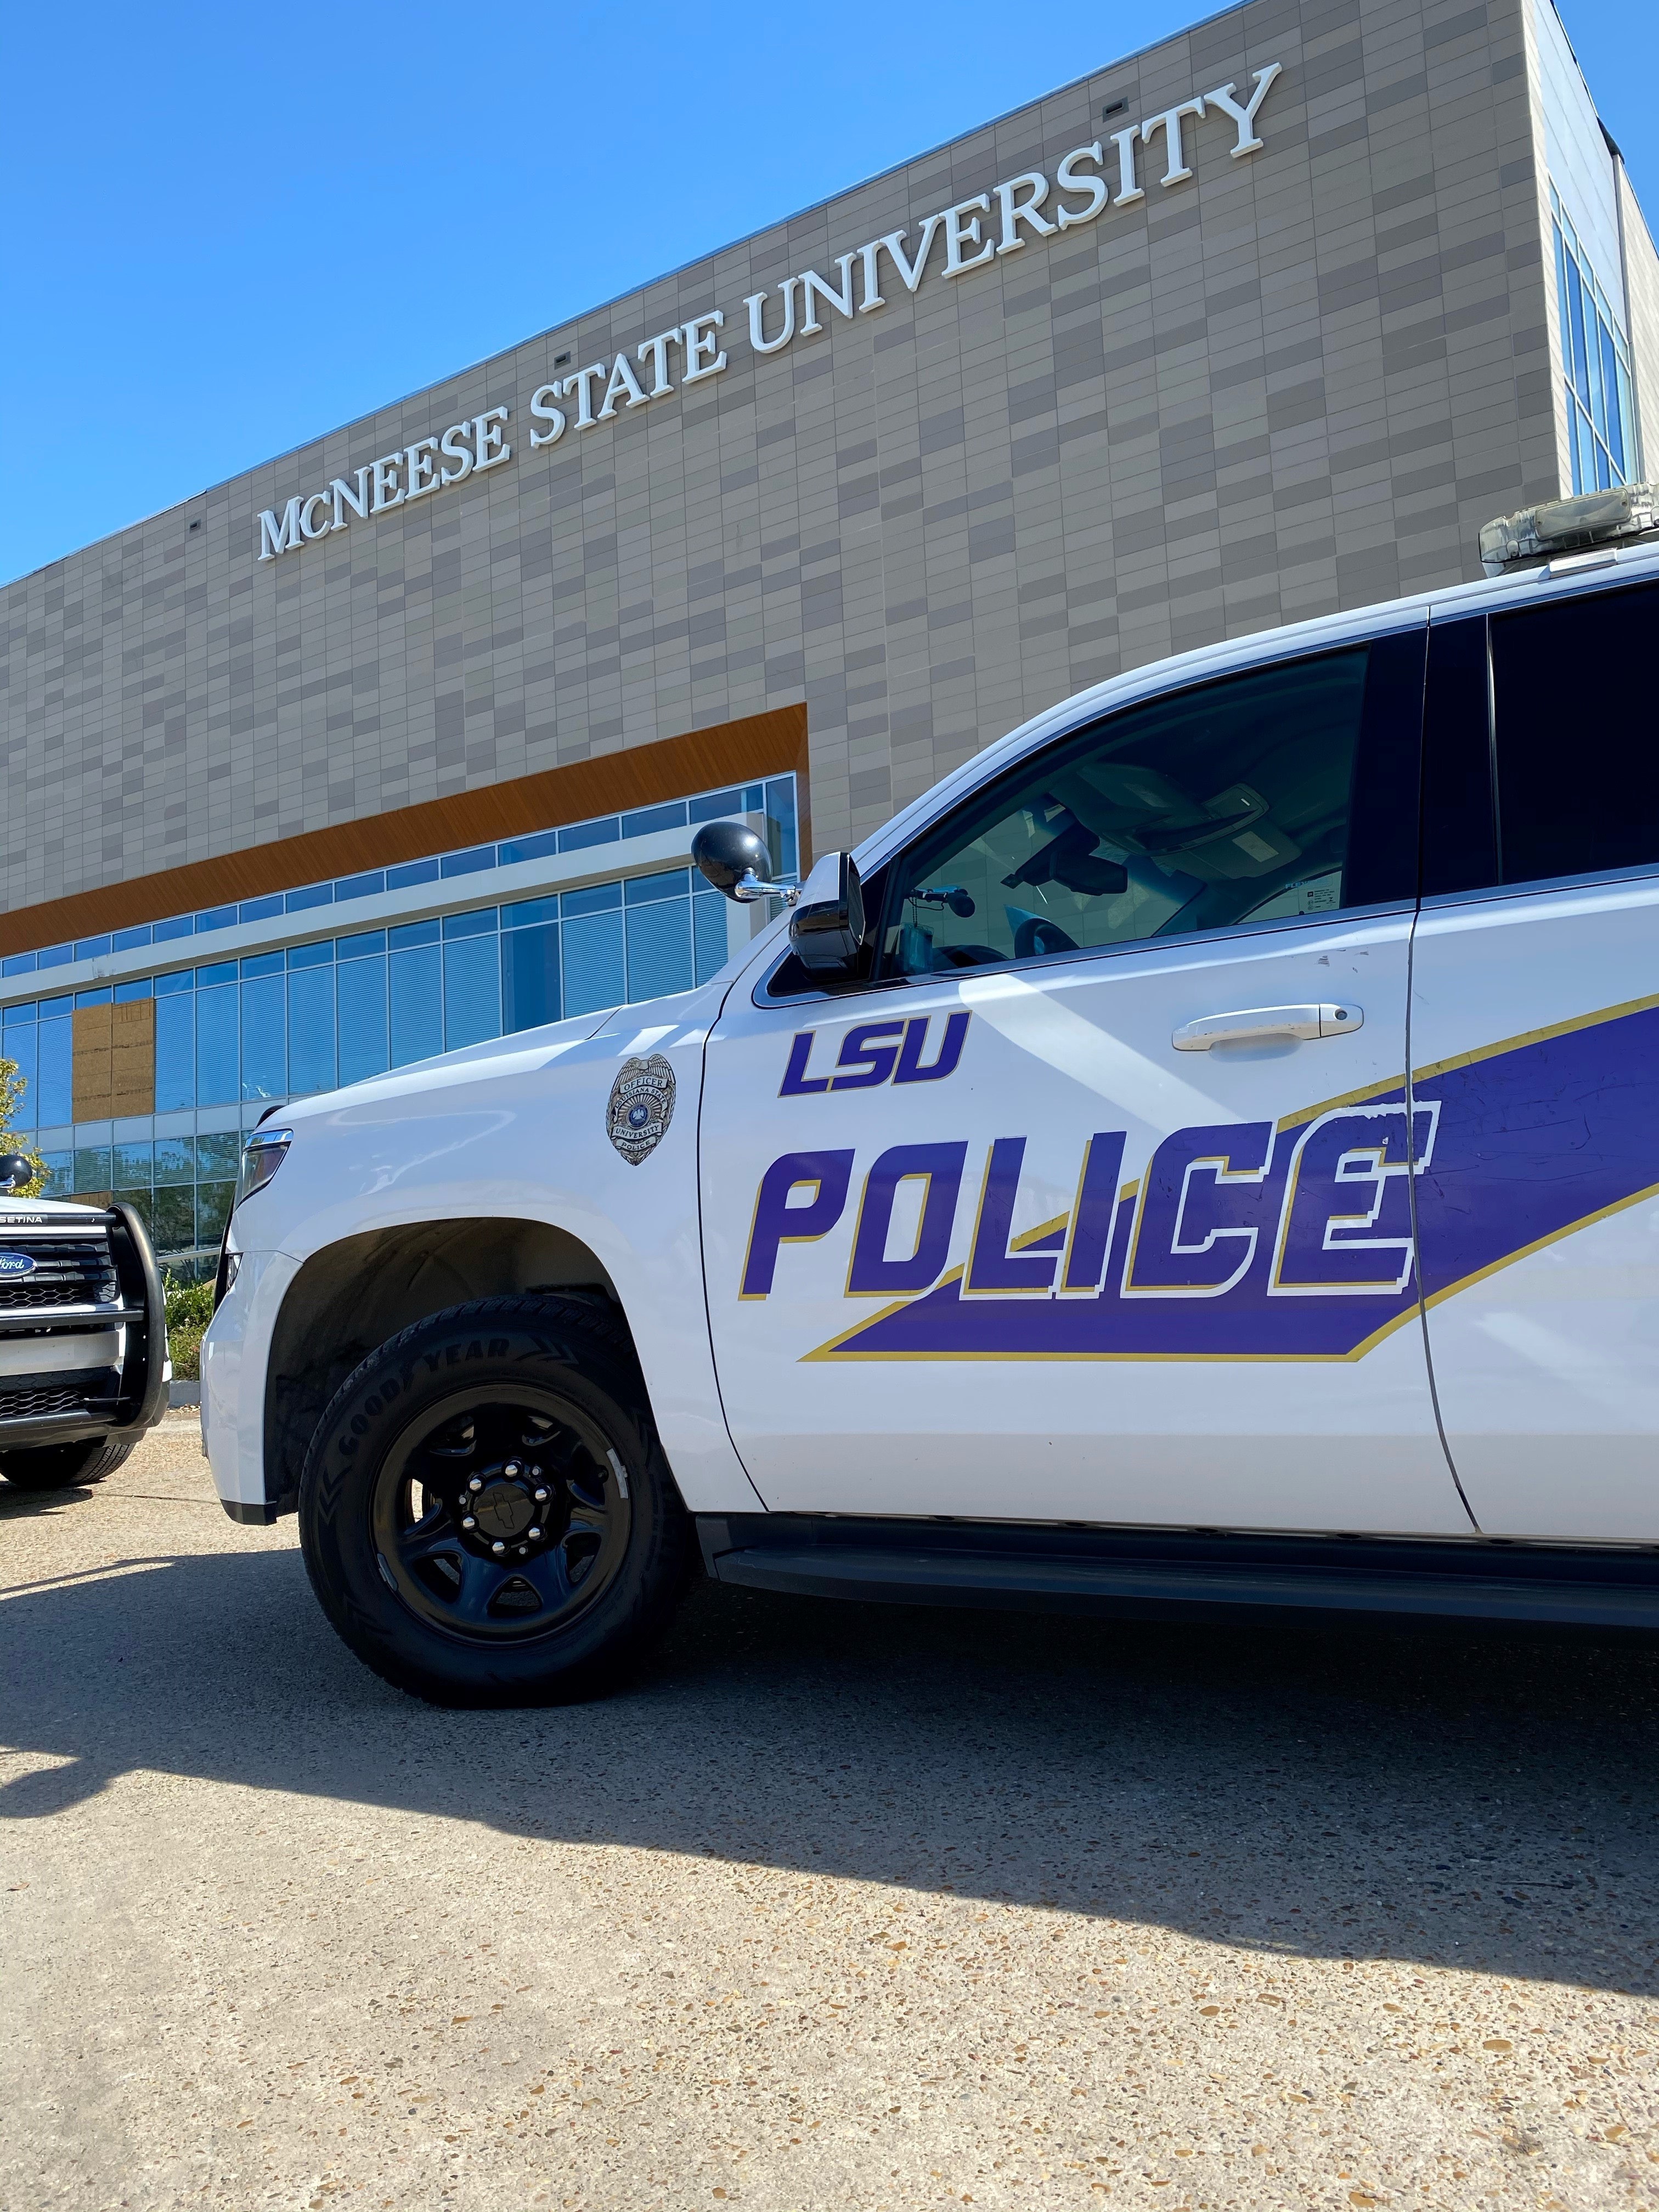 LSU PD vehicle parked in front of a McNeese State University building